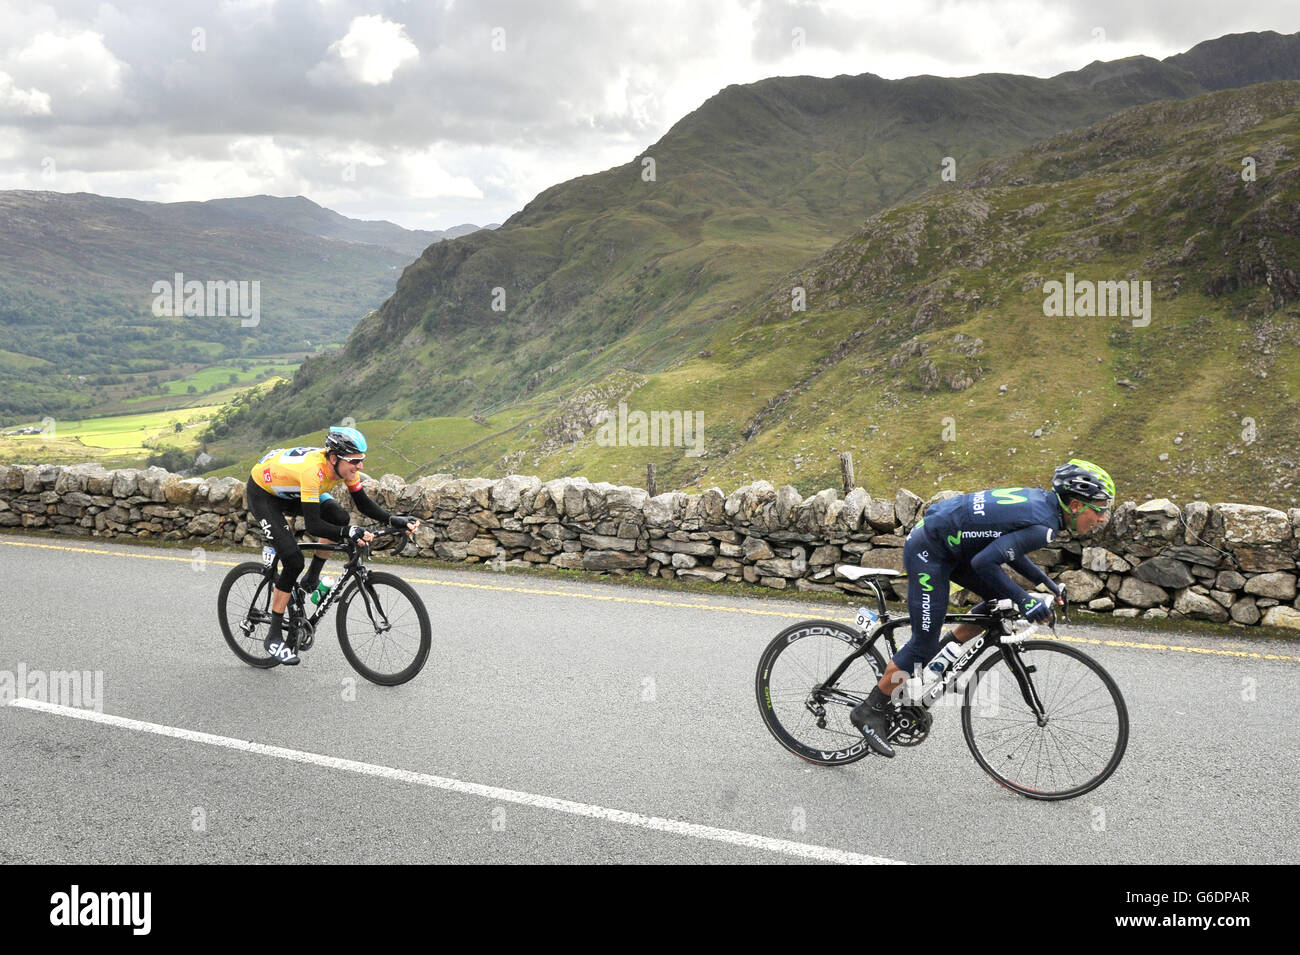 Team Sky's Bradley Wiggins follows Movistar's Nairo Quintana as they approach the top of Pen-Y-Pass with the Snowdon Massif in the background during the Stage Four of the 2013 Tour of Britain from Stoke to Llanberis. Stock Photo